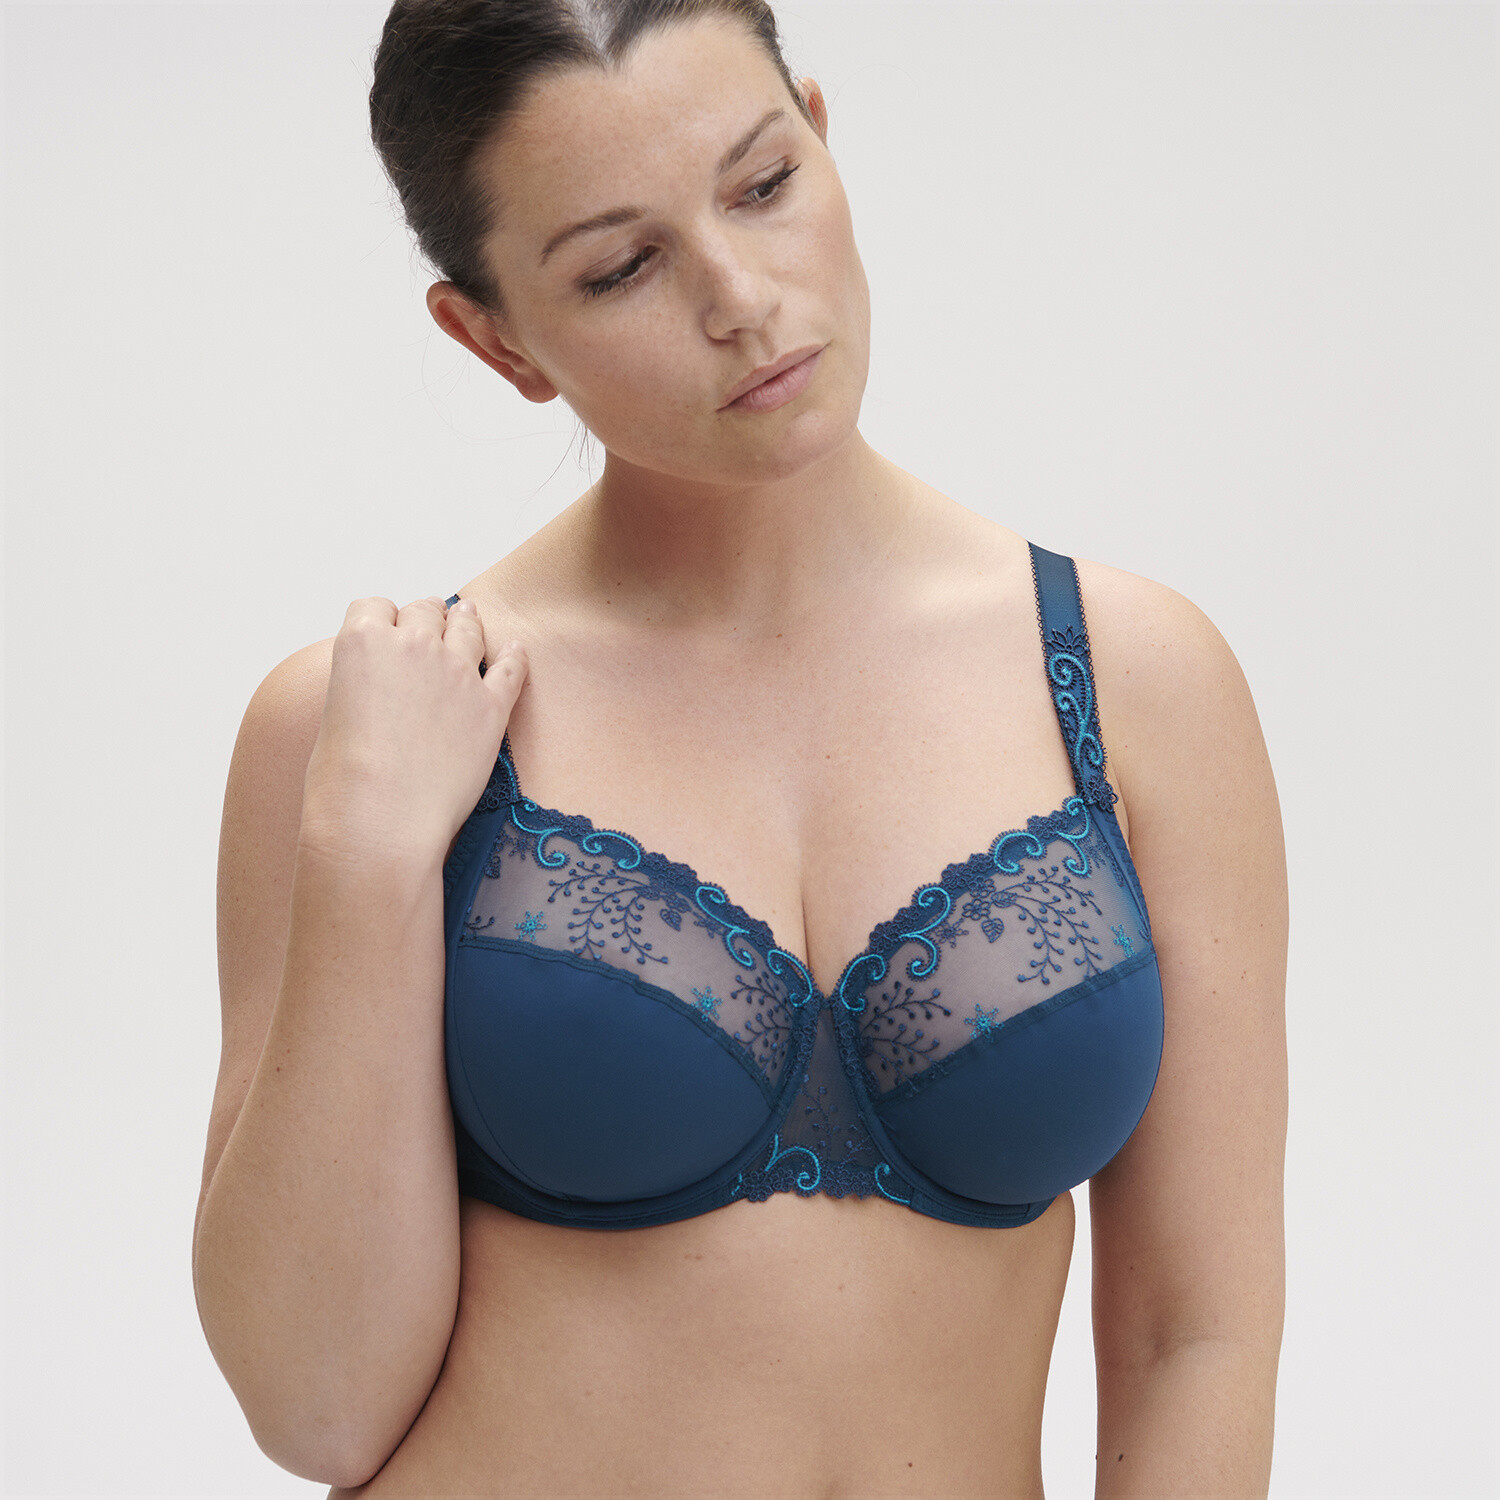 Buy COTTON CUP White BRA, Embroidered Cotton Wireless Seamed Cup